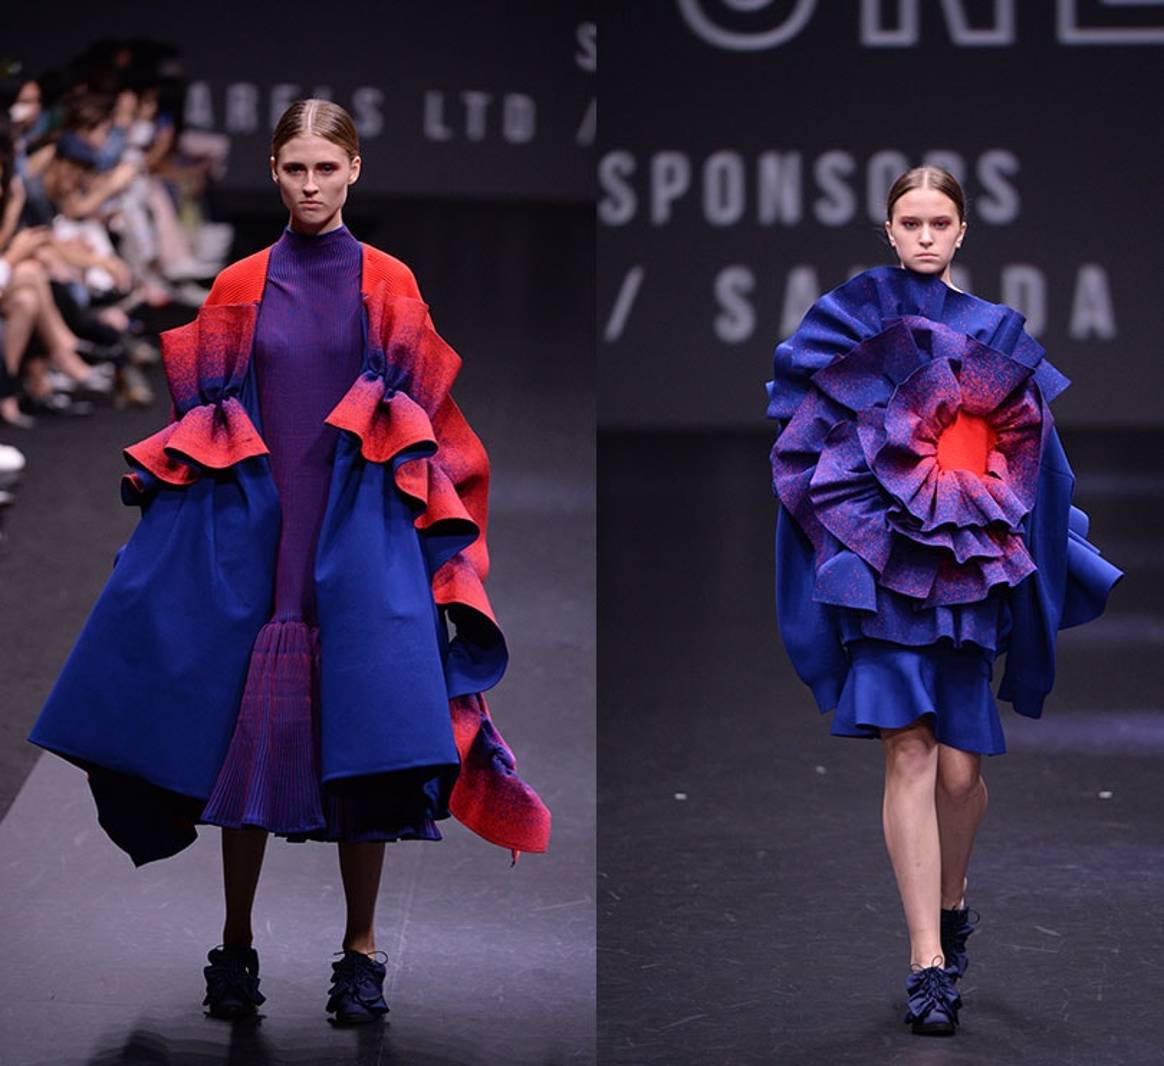 Hong Kong Young Fashion Designers' Contest winners announced